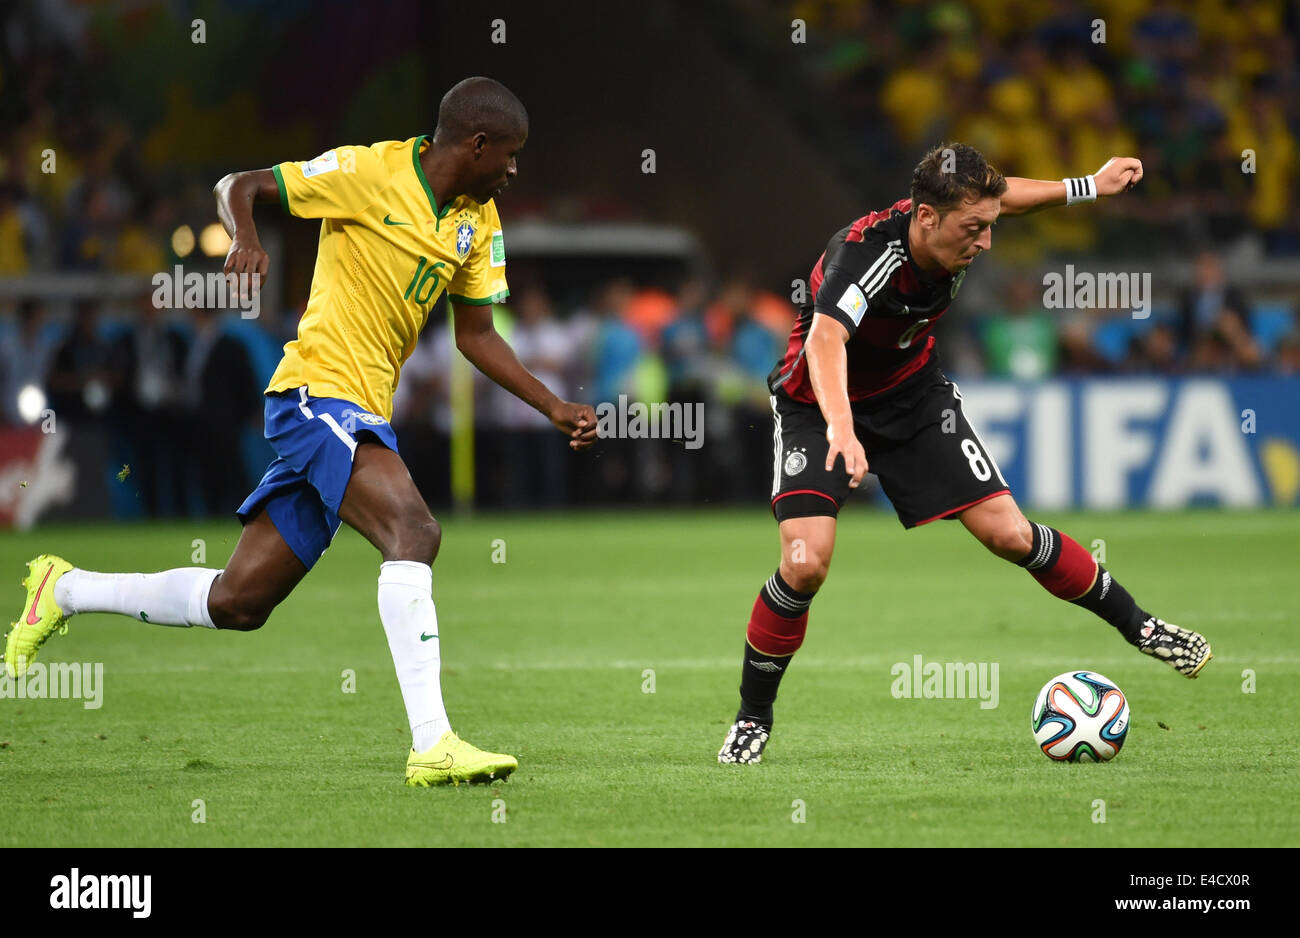 Belo Horizonte, Brazil. 8th July, 2014. Brazil's Ramires vies with Germany's Mesut Ozil during a semifinal match between Brazil and Germany of 2014 FIFA World Cup at the Estadio Mineirao Stadium in Belo Horizonte, Brazil, on July 8, 2014. Germany won 7-1 over Brazil and qualified for the final on Tuesday. Credit:  Li Ga/Xinhua/Alamy Live News Stock Photo